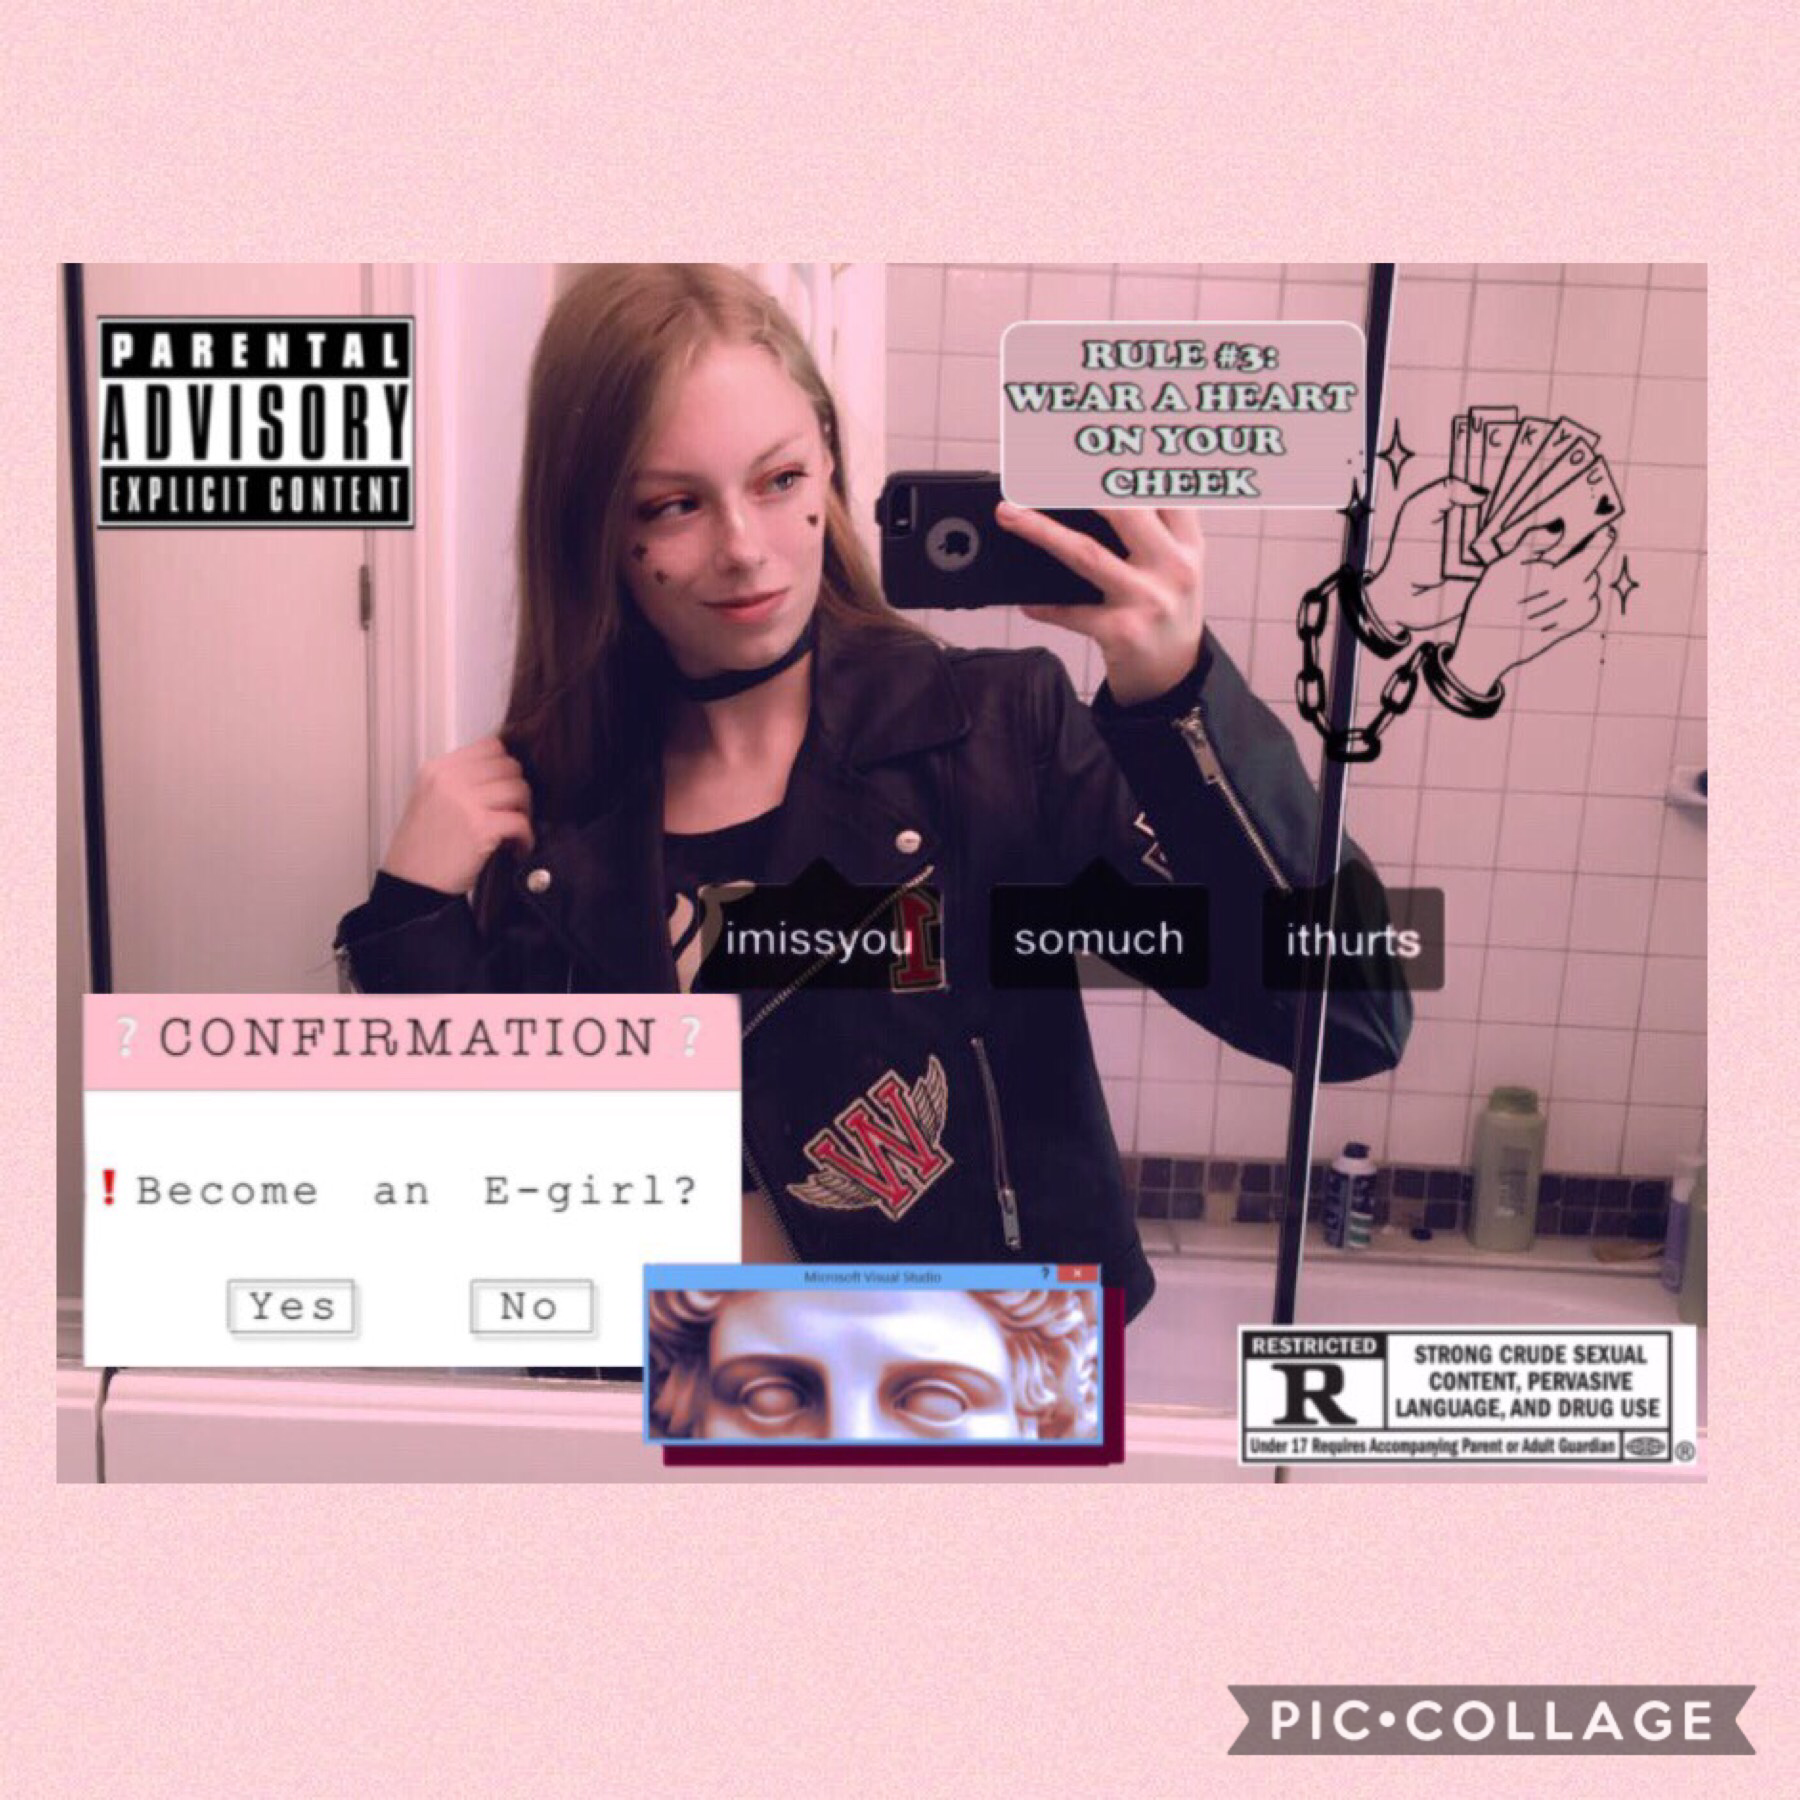 🖤🌸tap🌸🖤

song of the day: 
Bad Guy
artist: Billie Eilish

~idk, sometimes I get bored 